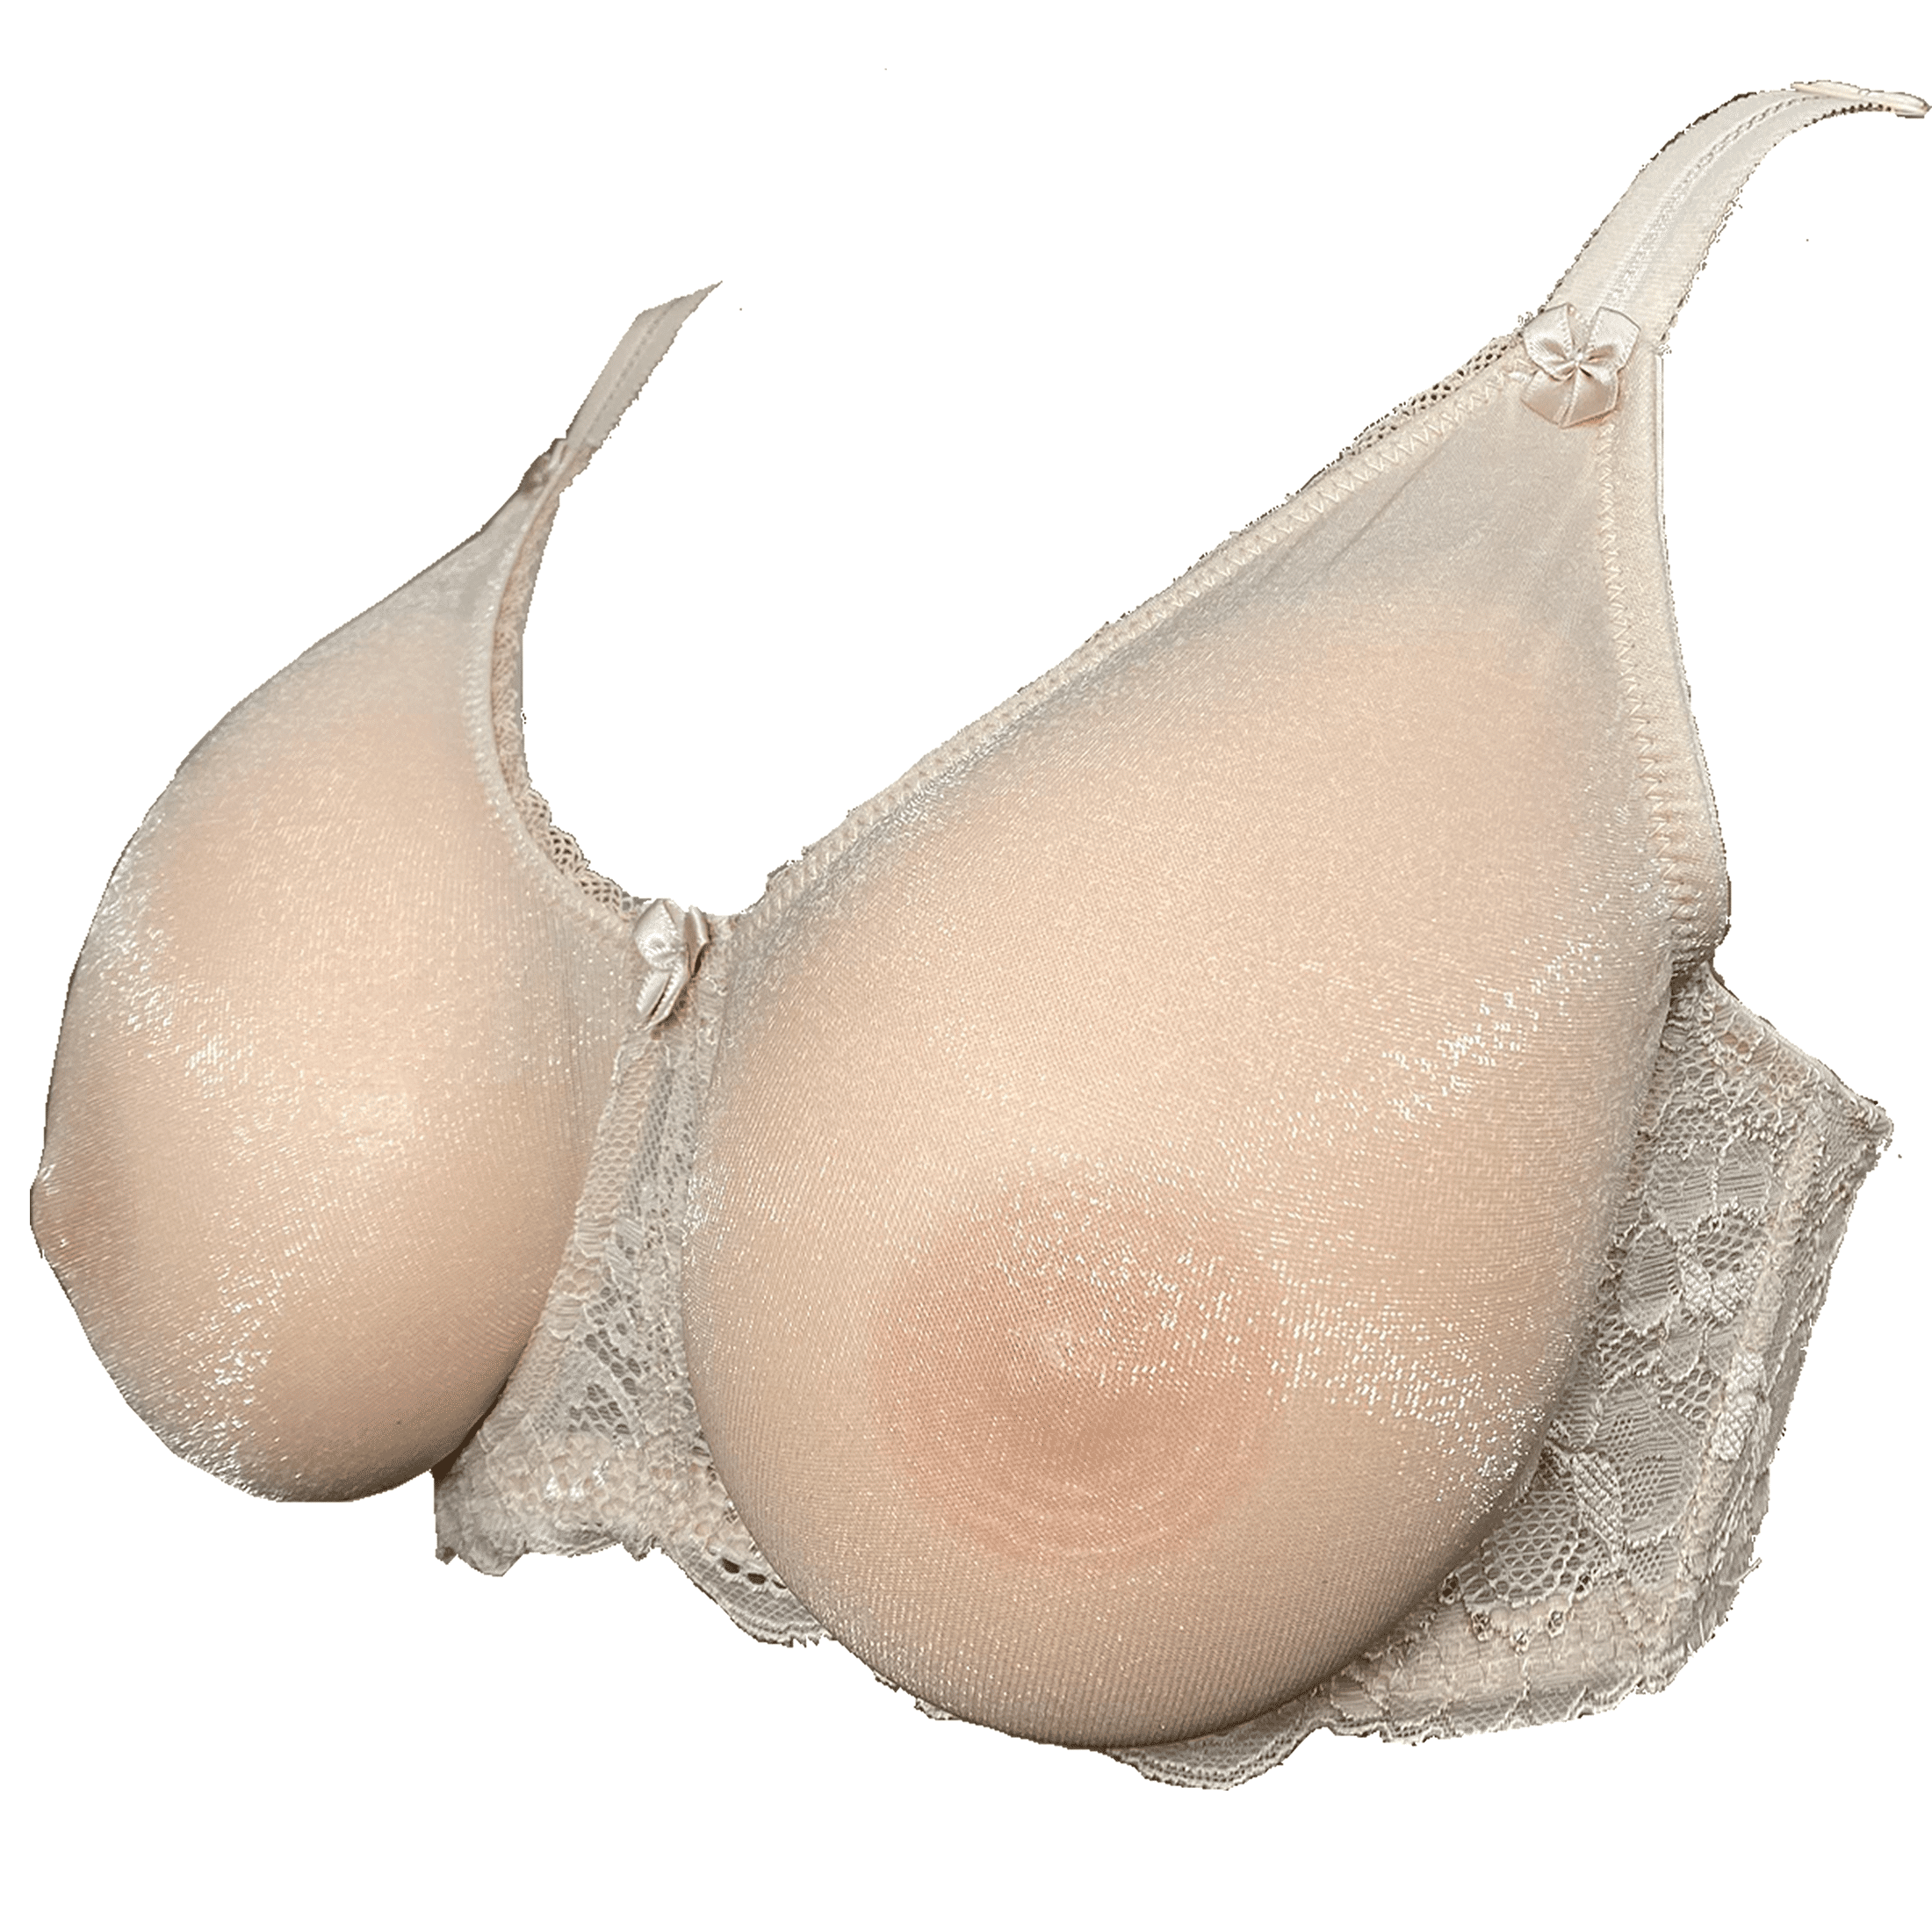 BIMEI See Through Bra CD Lace Mastectomy Lingerie Bra Silicone Breast Forms  Prosthesis Pocket Bra with Steel Ring 9018,Beige,36D